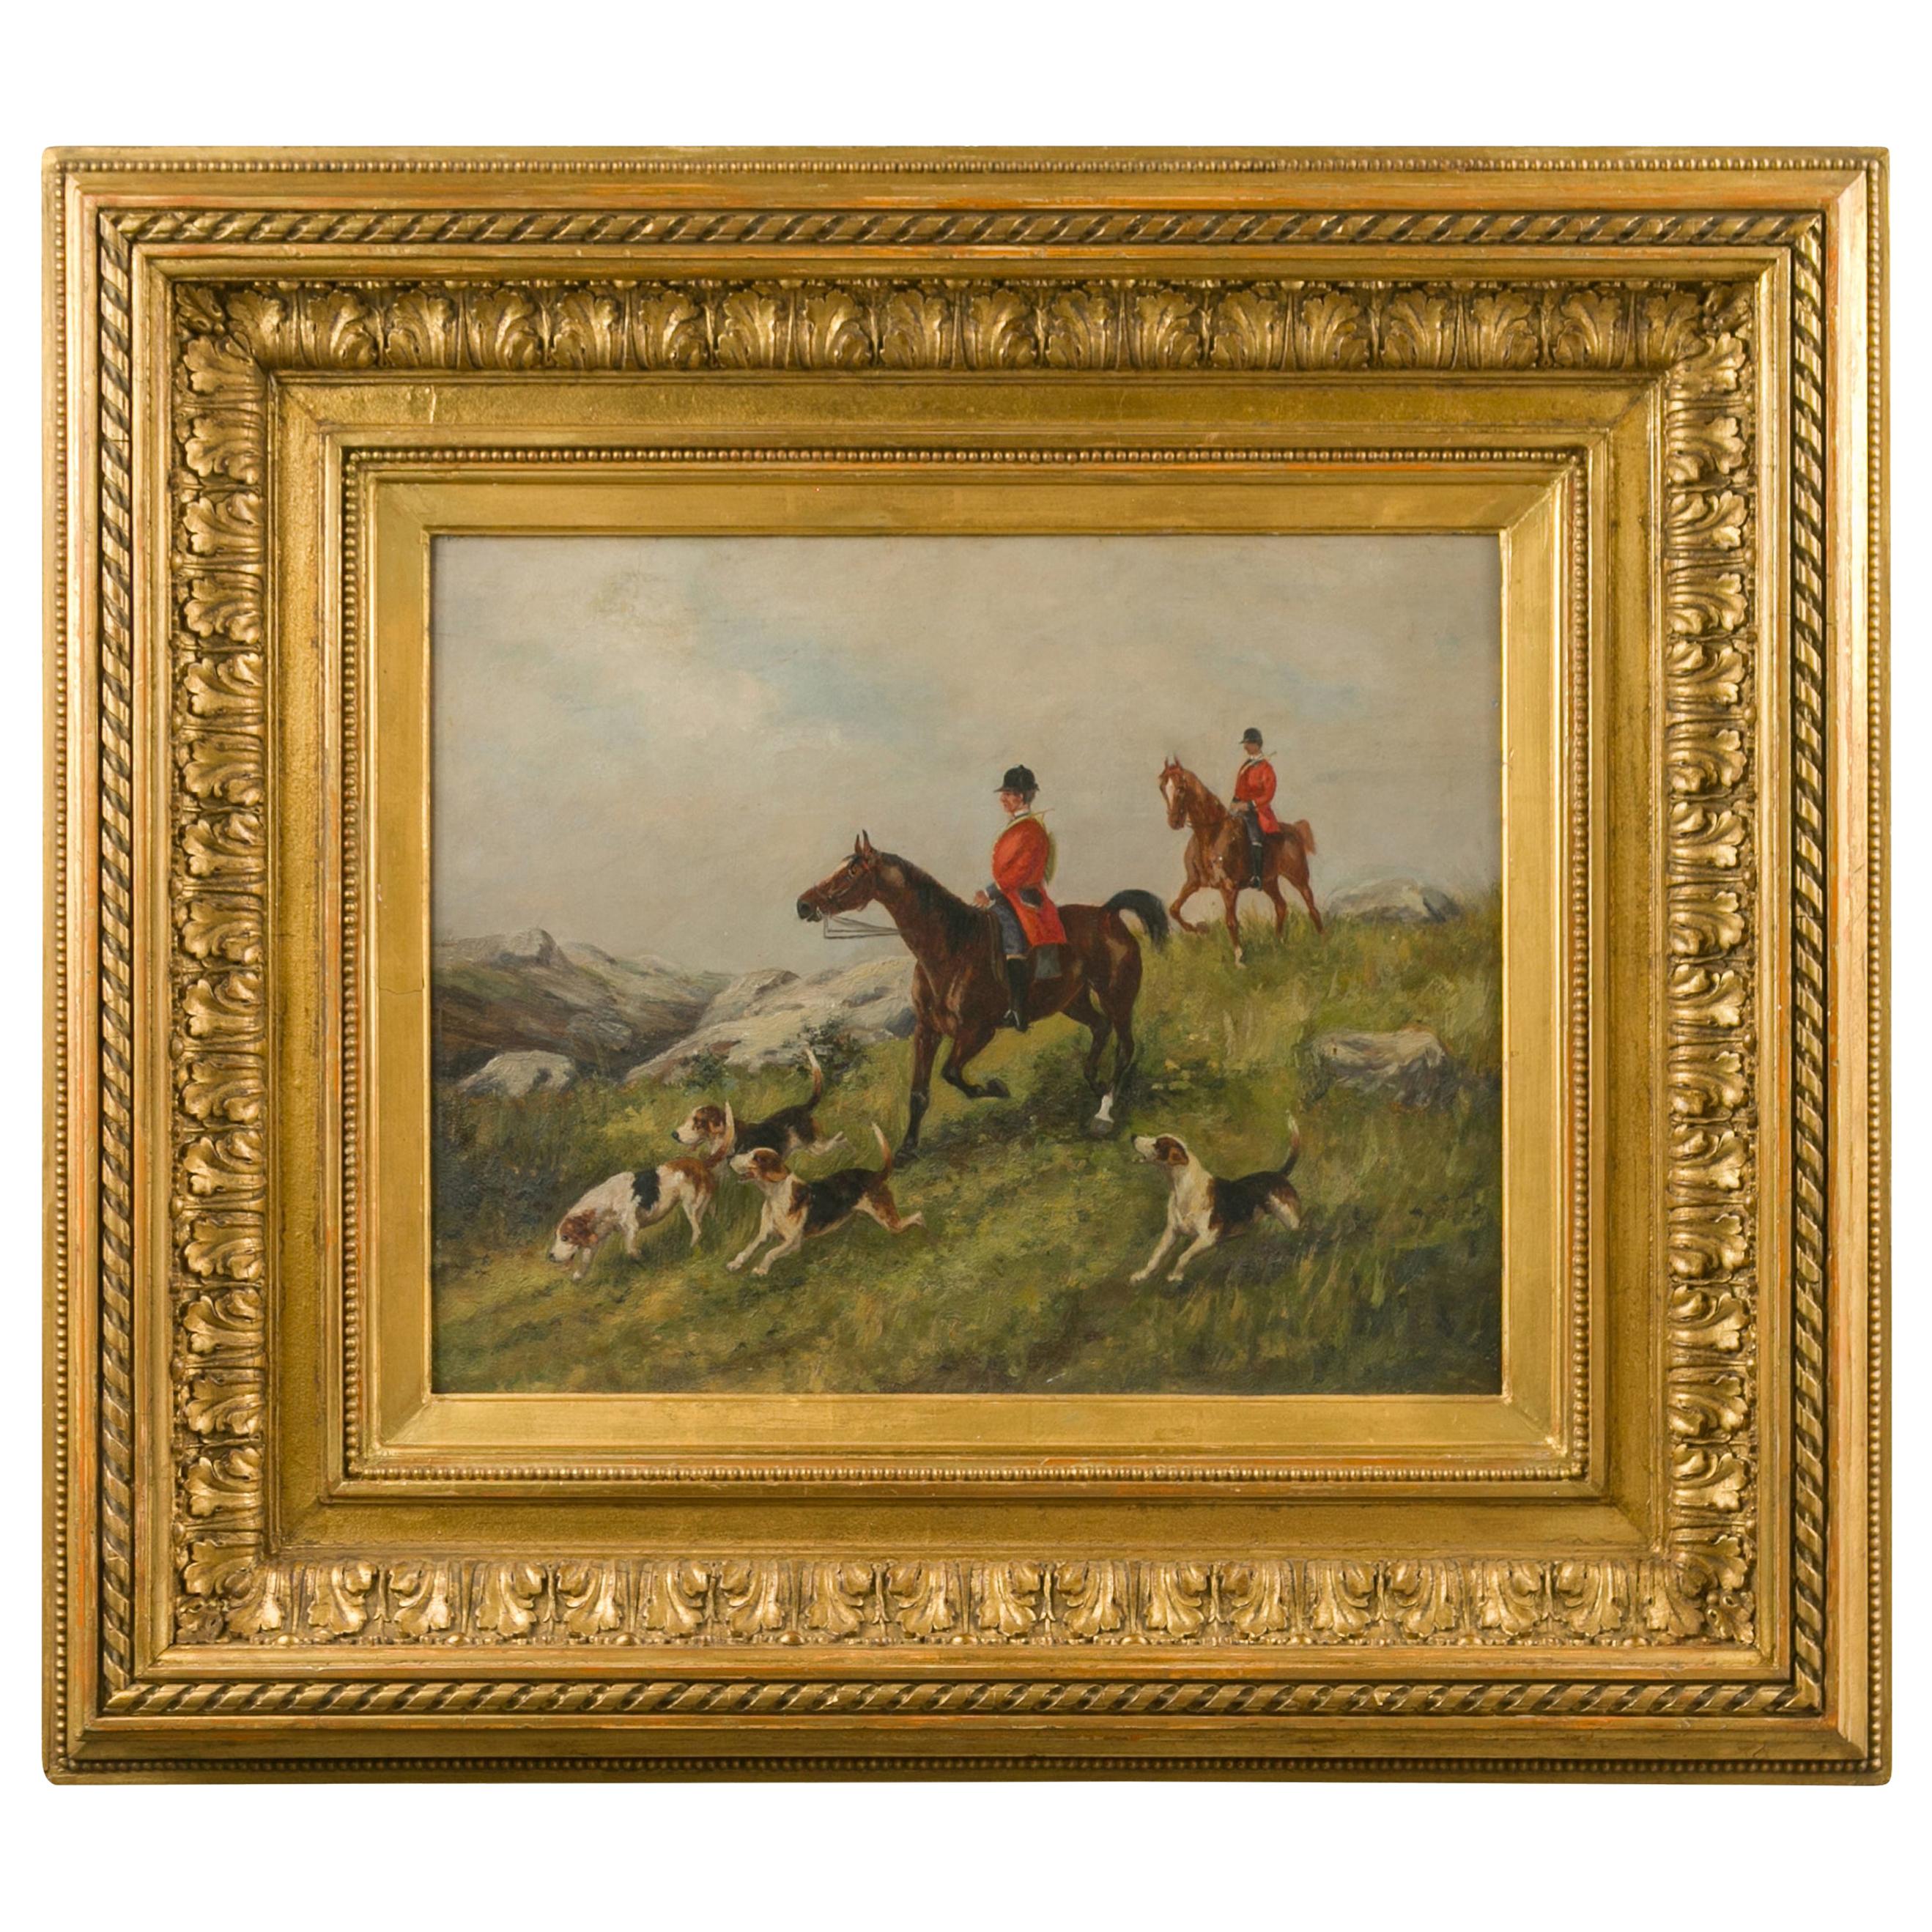 English 1880s Oil on Board Painting Depicting a Hunting Scene, in Antique Frame